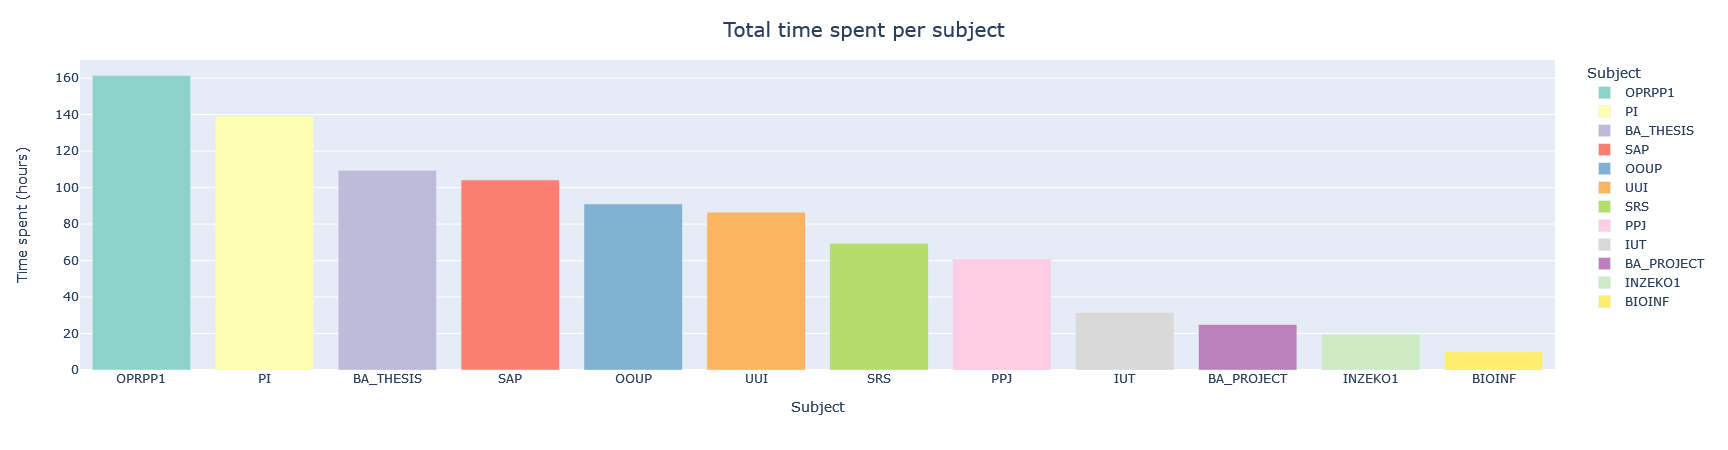 Time per subject